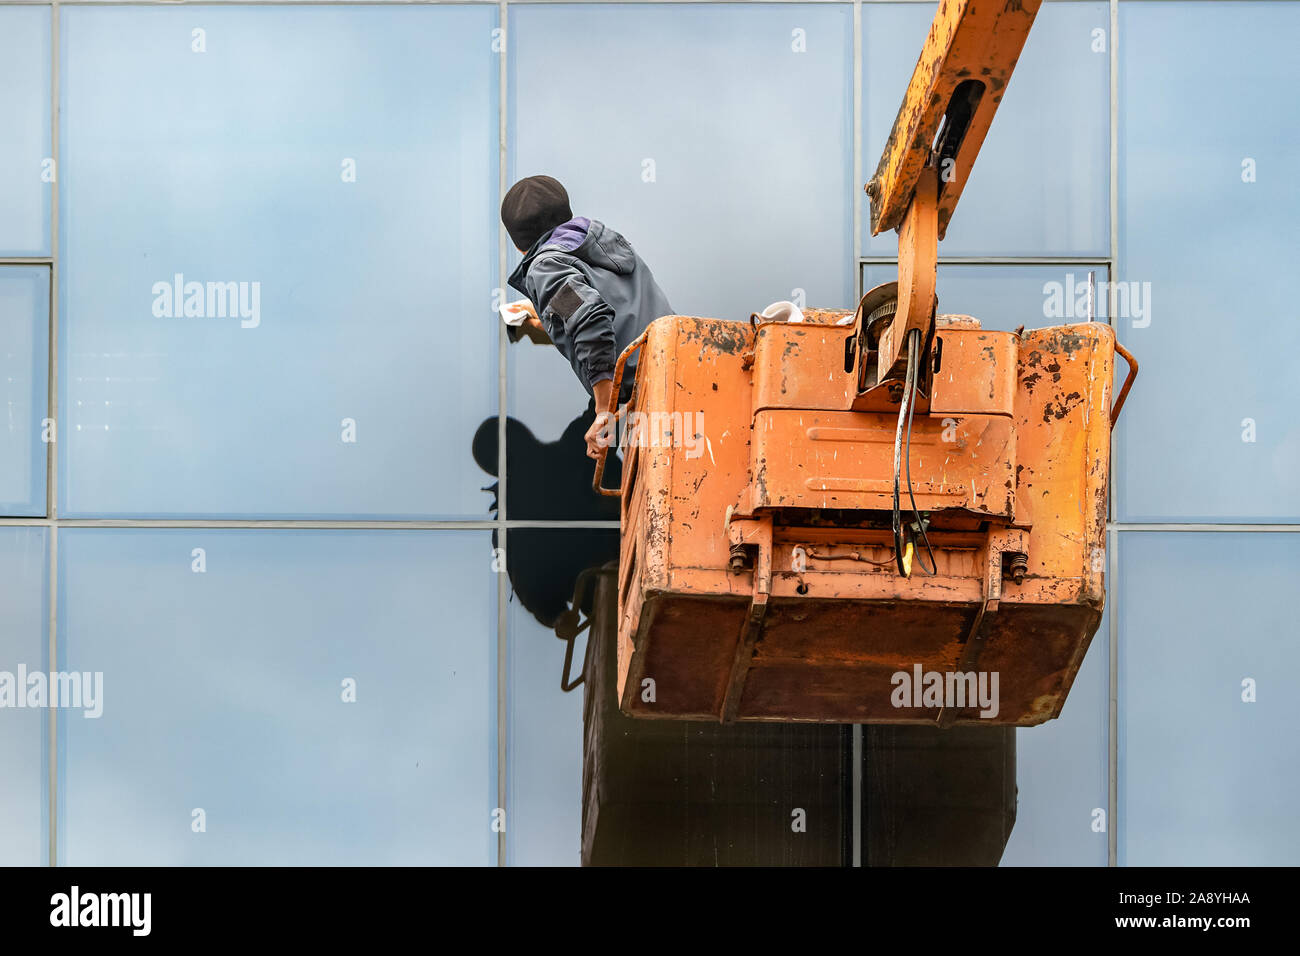 A male unidentifiable worker cleaning the windows of a building standing on a crane, outdoors Stock Photo